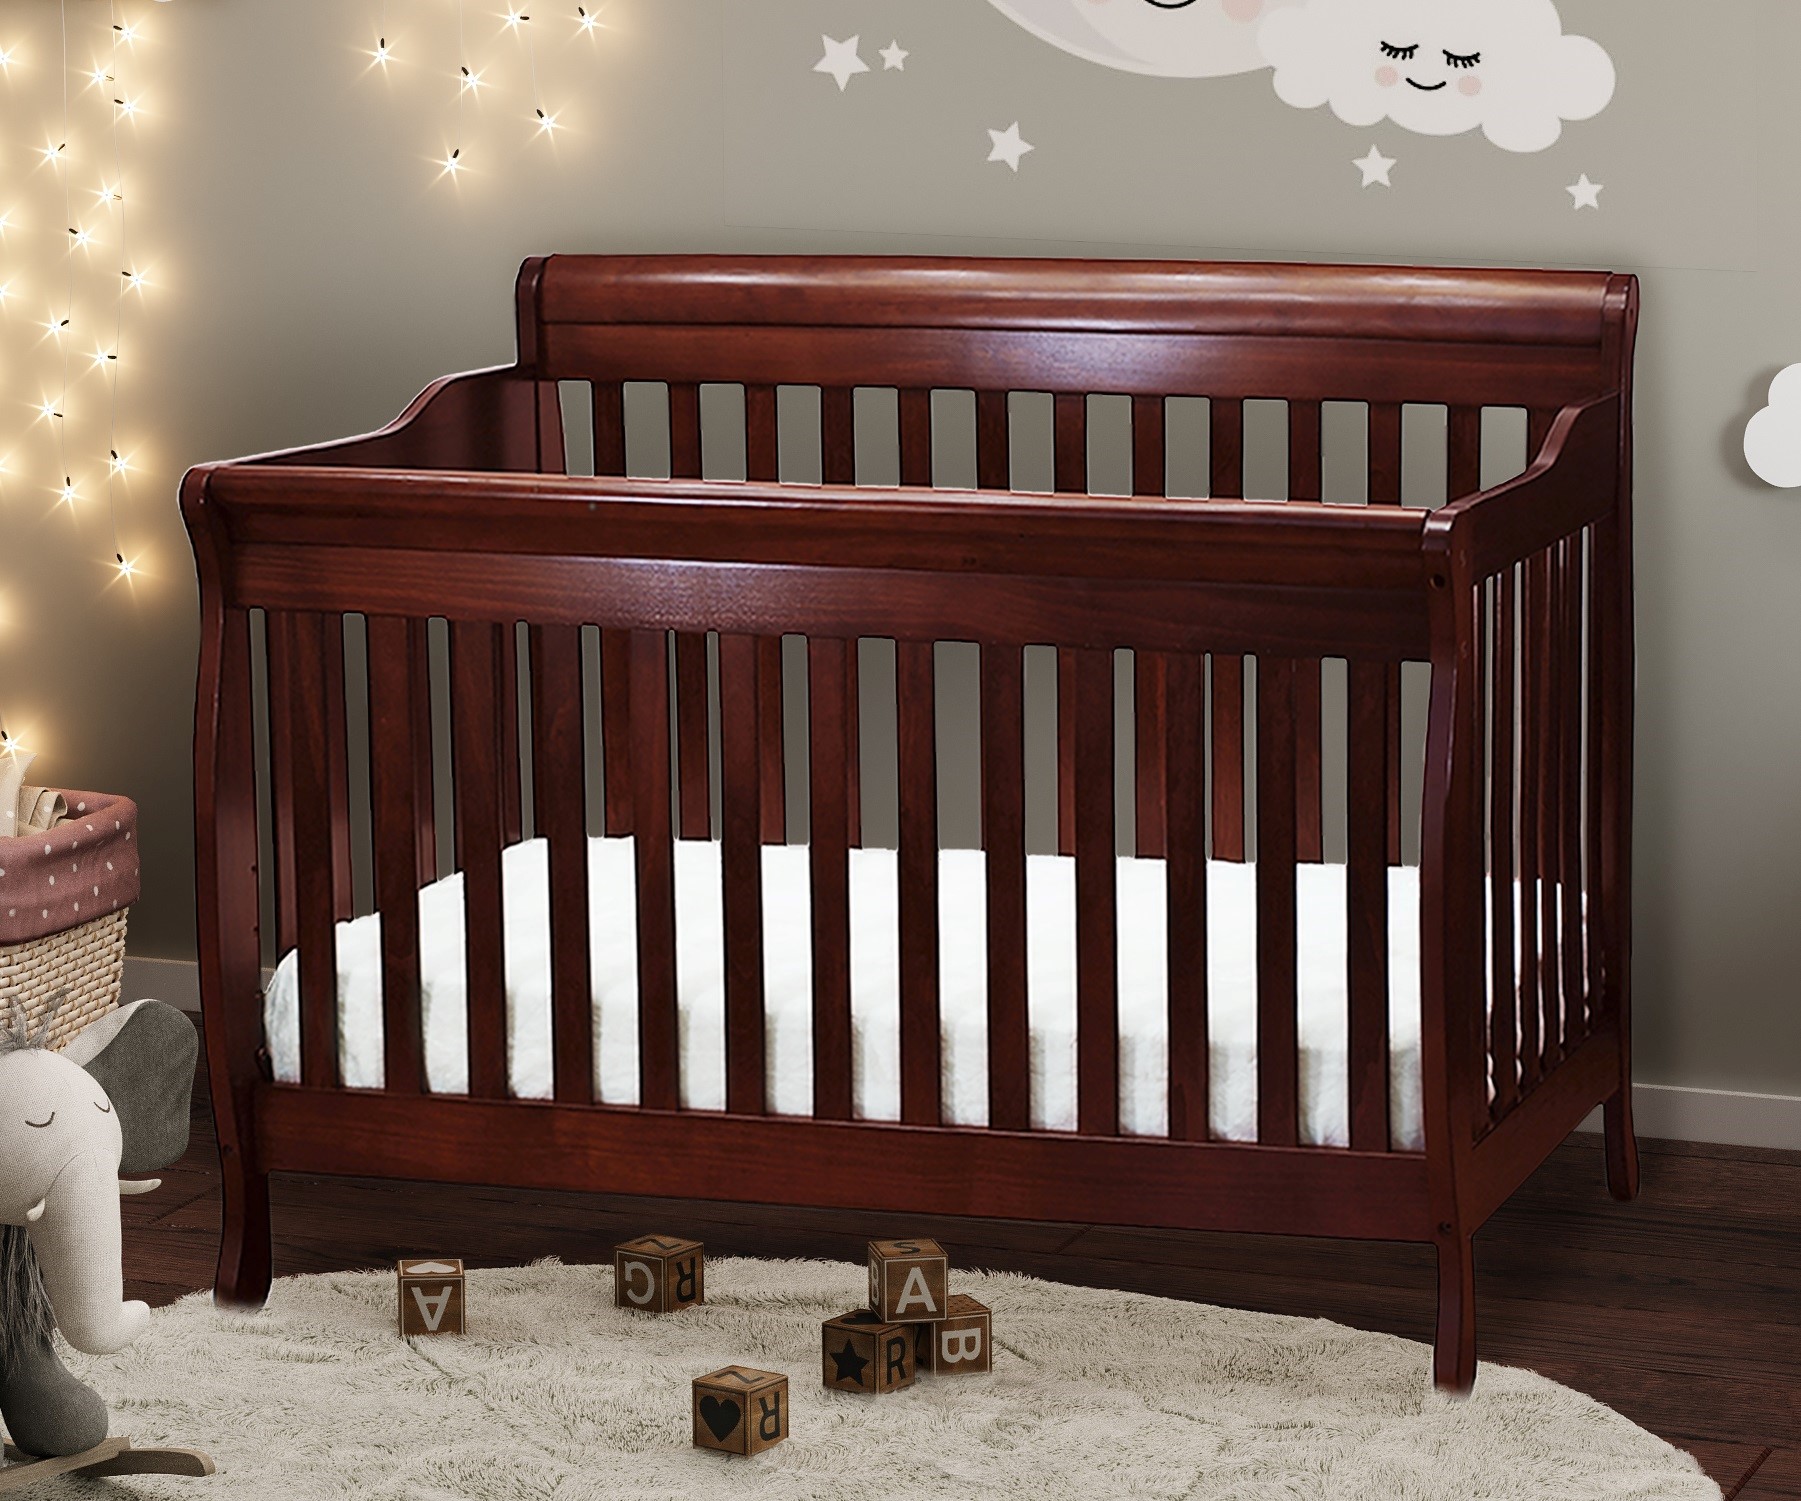 Afg Athena Alice 3 In 1 Convertible Crib With Toddler Rail - Cherry - 4689c